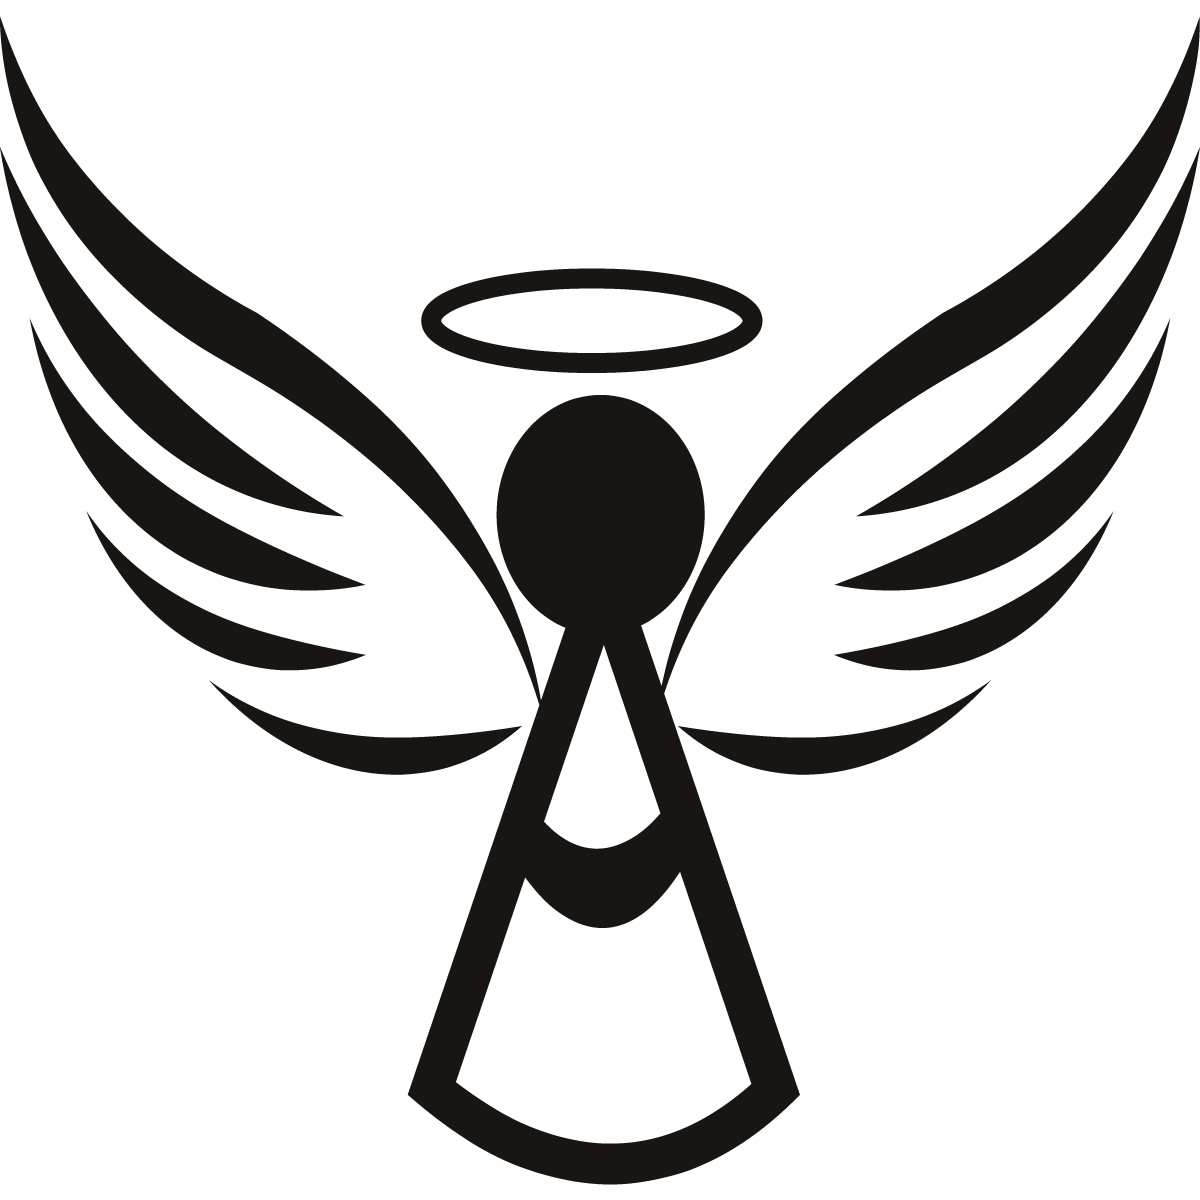 angels clipart free download - photo #29